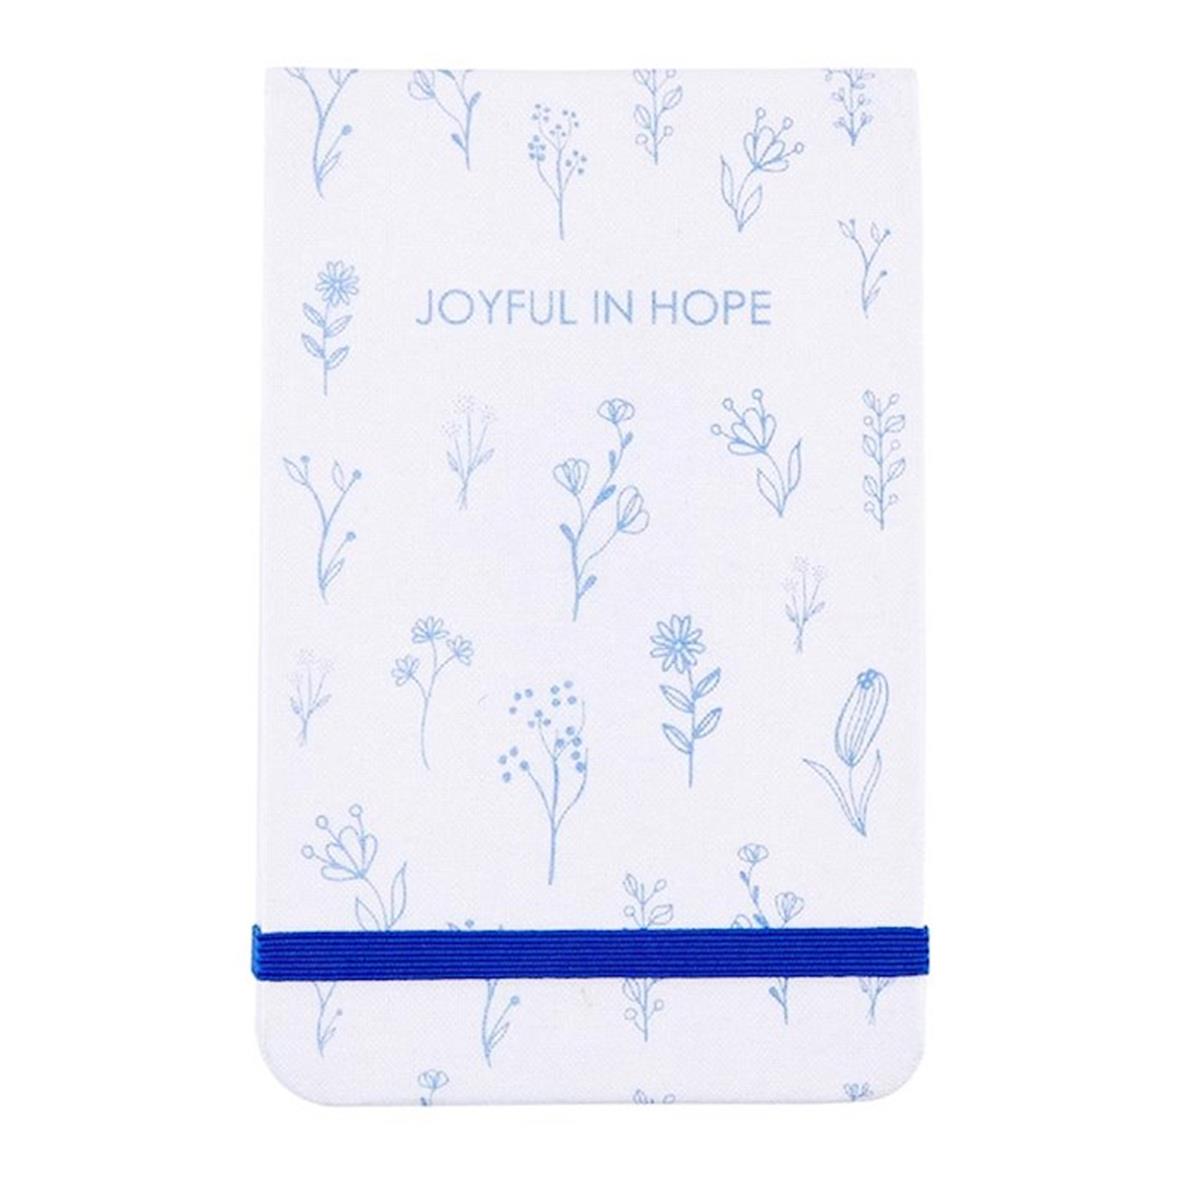 Picture of CB Gift 256149 3.5 x 5.5 in. Linen Notepad - Joyful in Hope - Hardcover with Elastic Closure